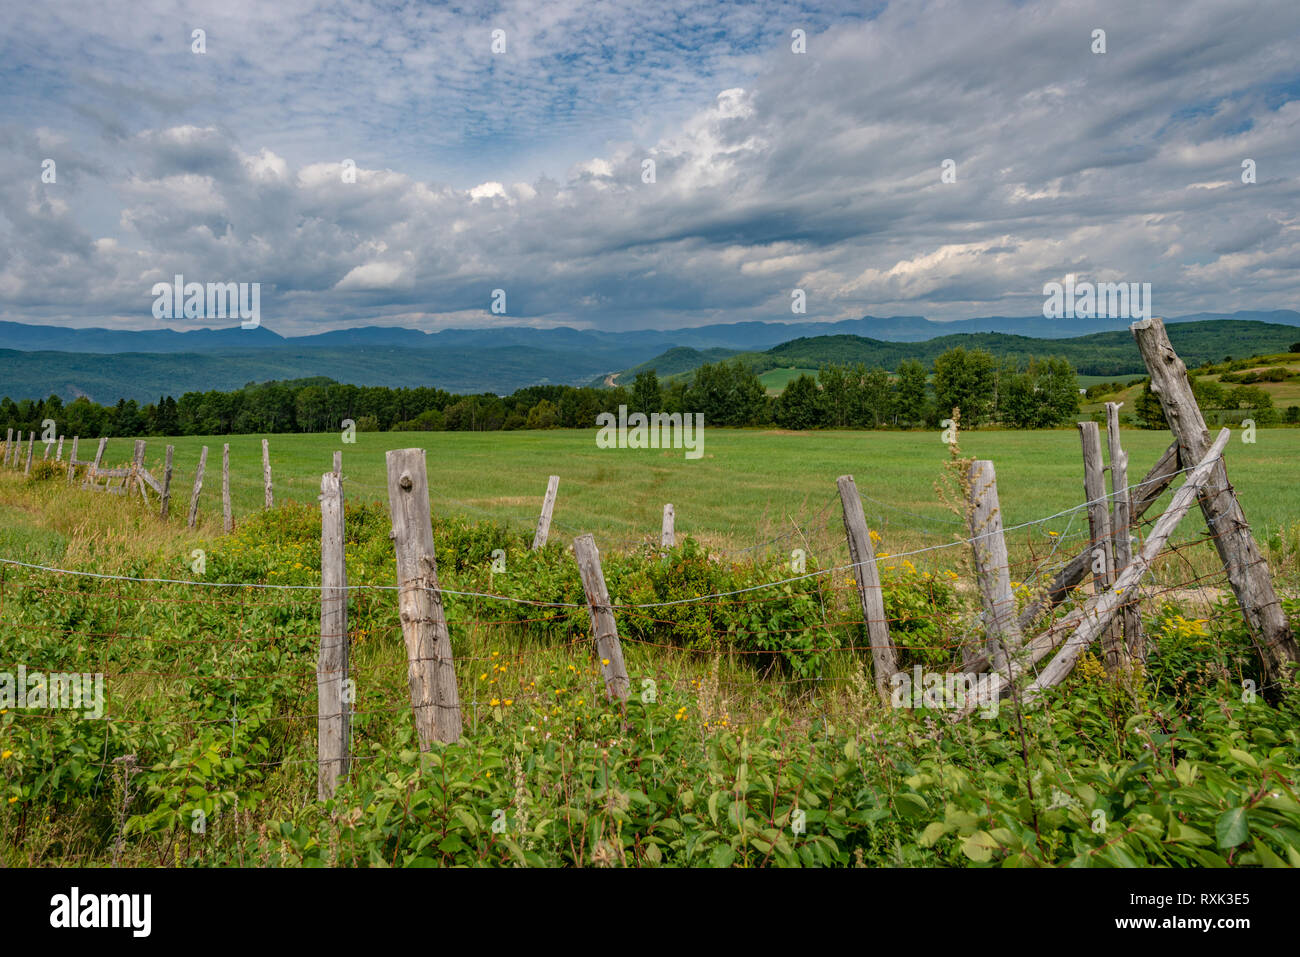 Fields in the hilly landscape of Charlevoix with wooden fencing in the foreground, province of Quebec, Canada Stock Photo